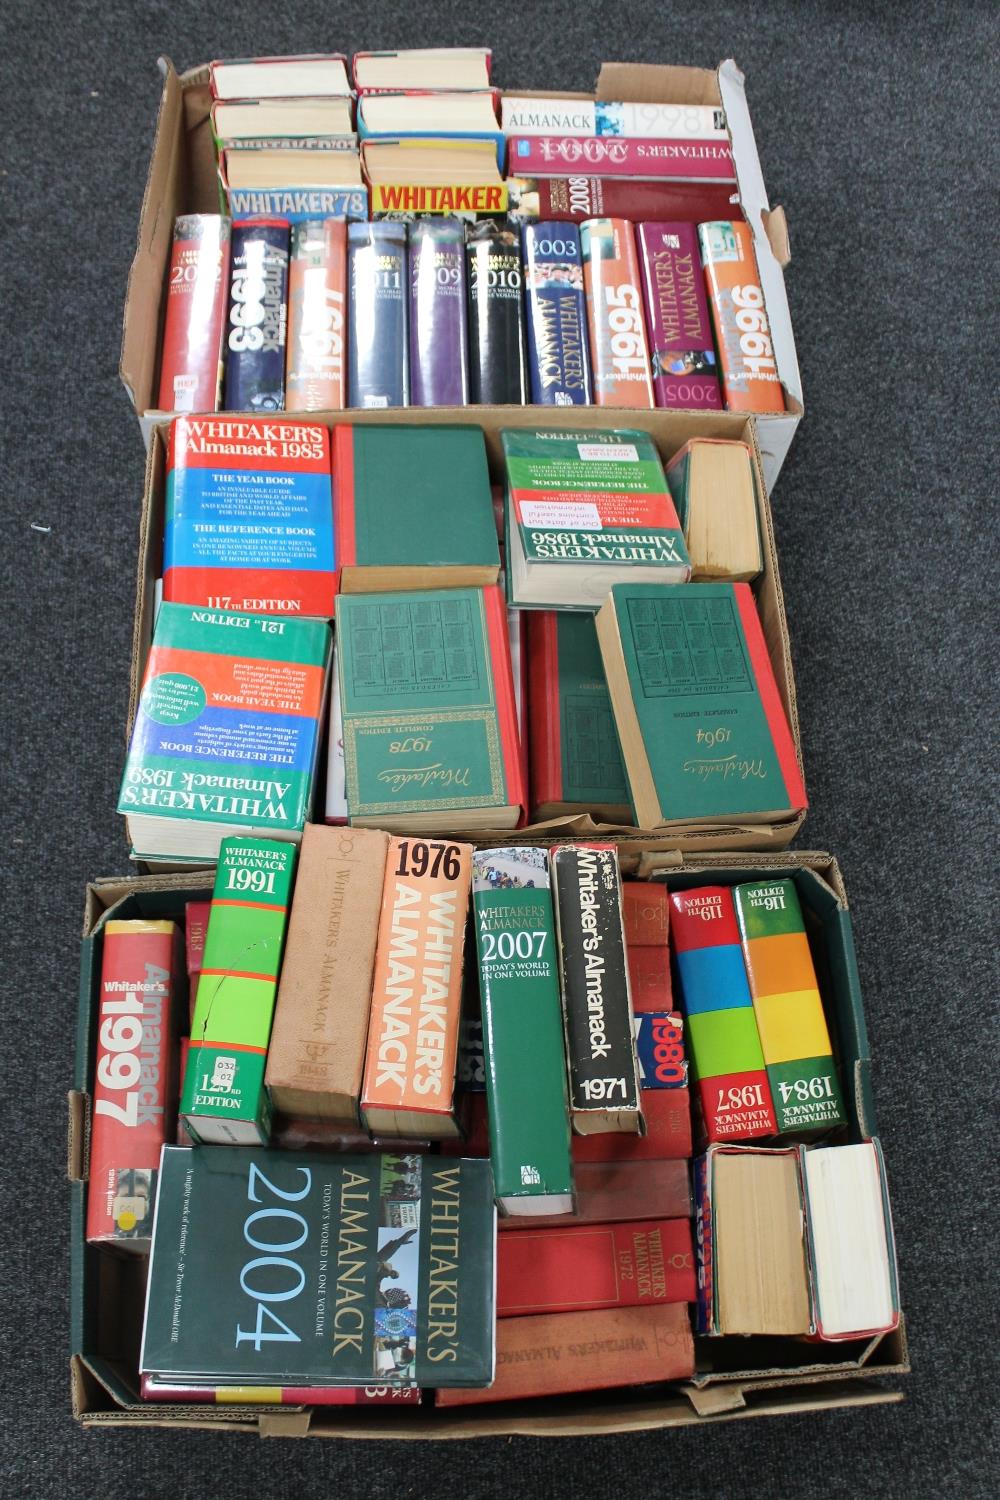 Three boxes containing a large quantity of Whitaker's Almanacks dating from 1937 to 2012 (some